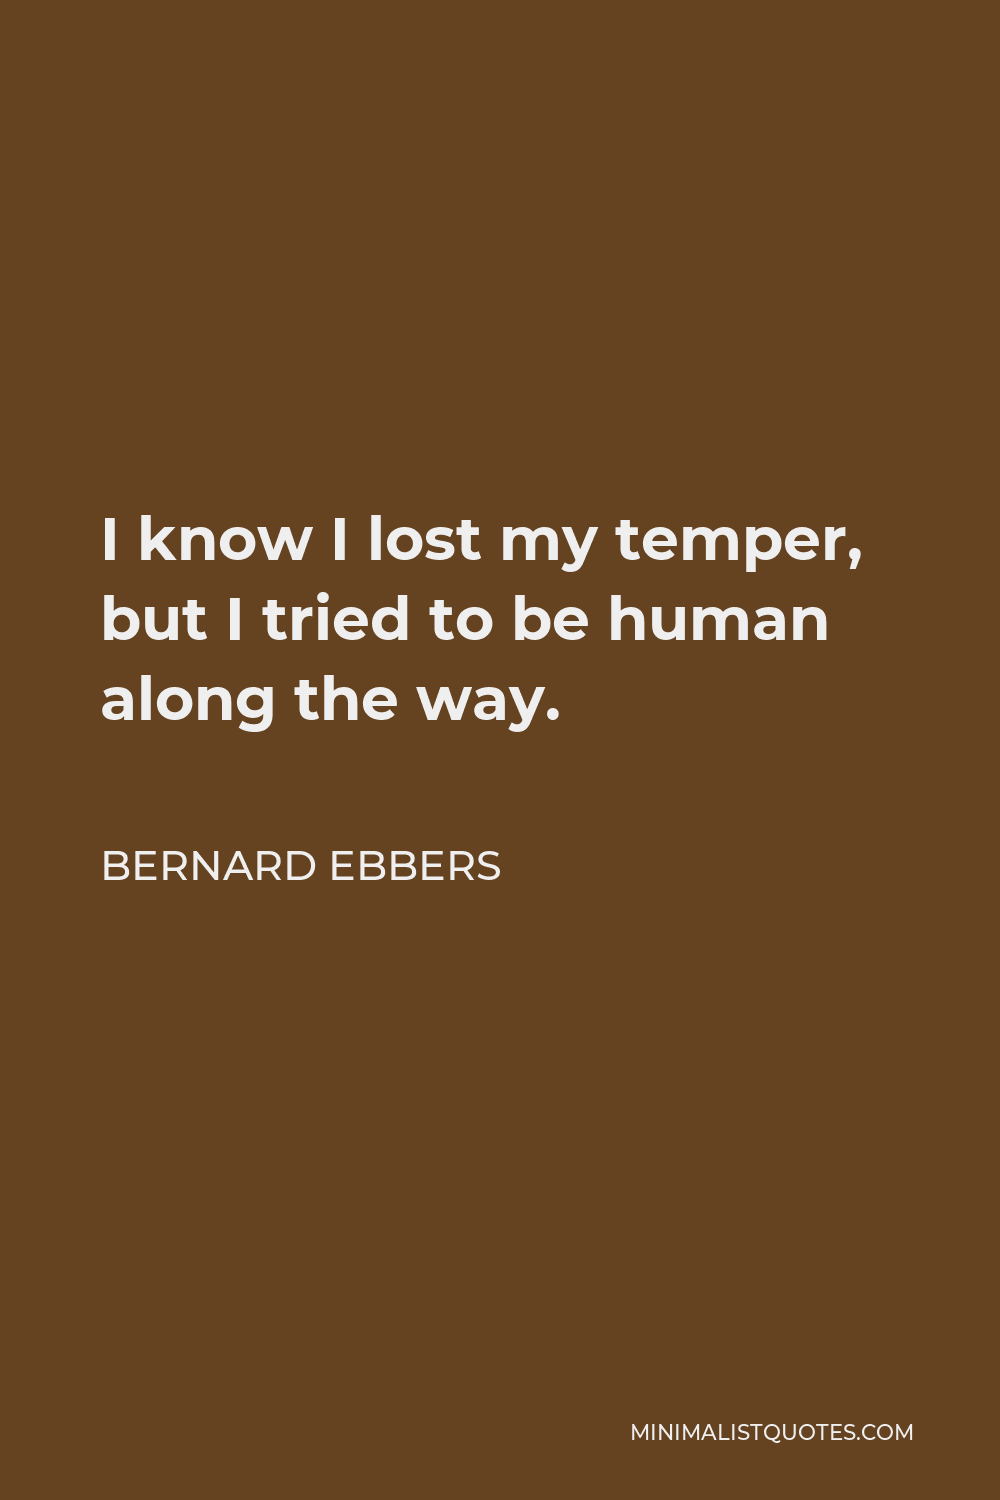 Bernard Ebbers Quote - I know I lost my temper, but I tried to be human along the way.